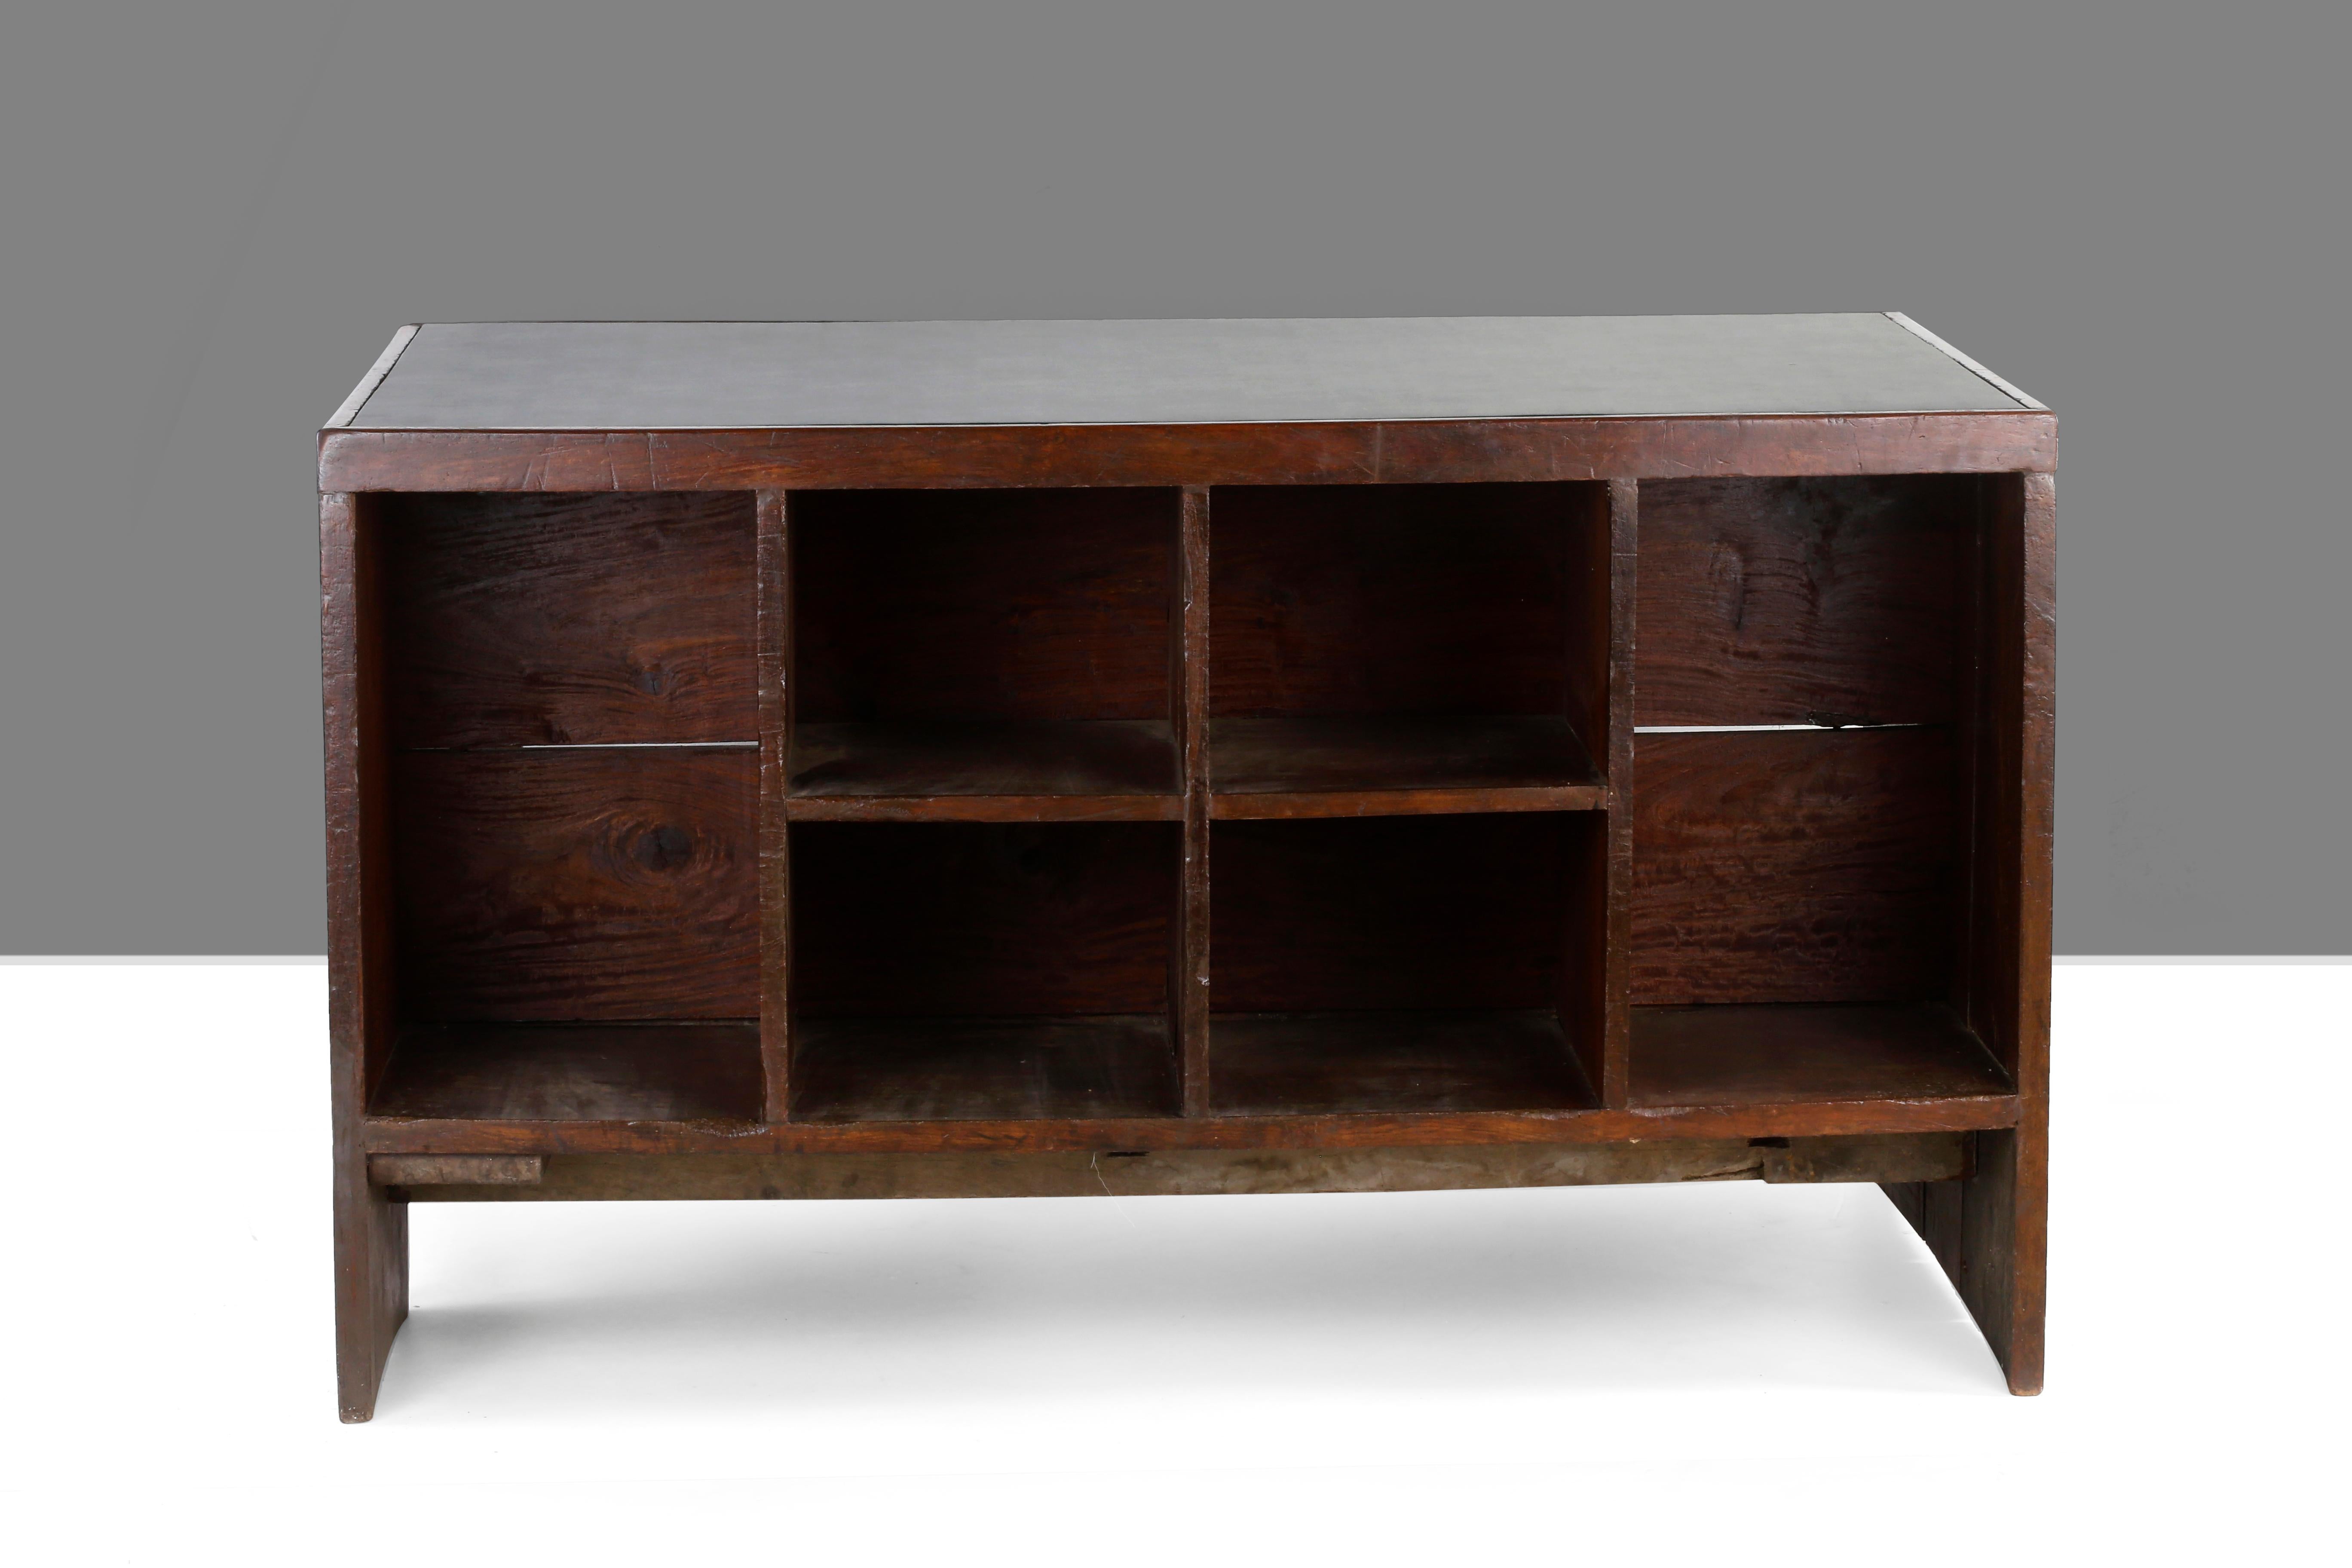 Office desk, 1957-1958. Rectangular top covered in green skai on a frame, affixed on one side by a panel forming a left side leg with a box section including a drawer and compartment and on the other side, a profiled leg with a flat triangular rail.